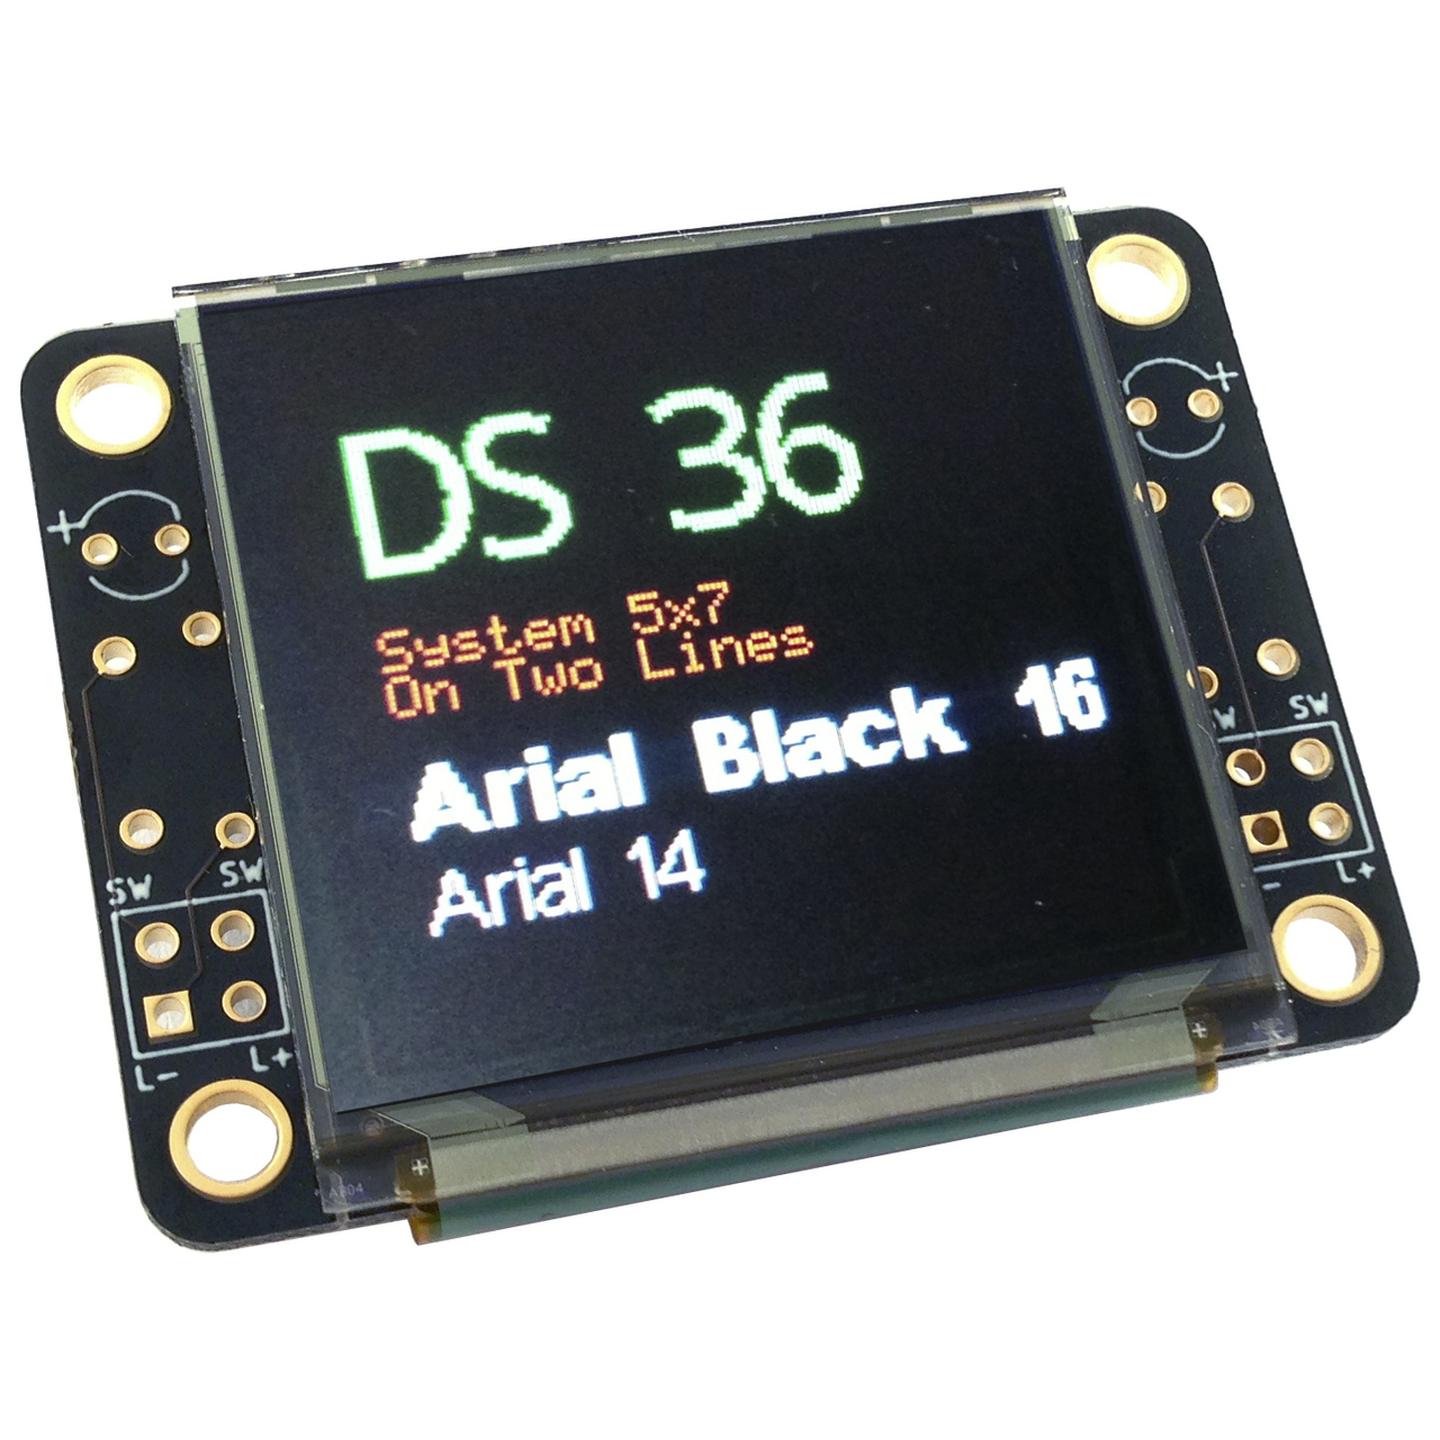 128x128 Pixel OLED Display Module for Arduino